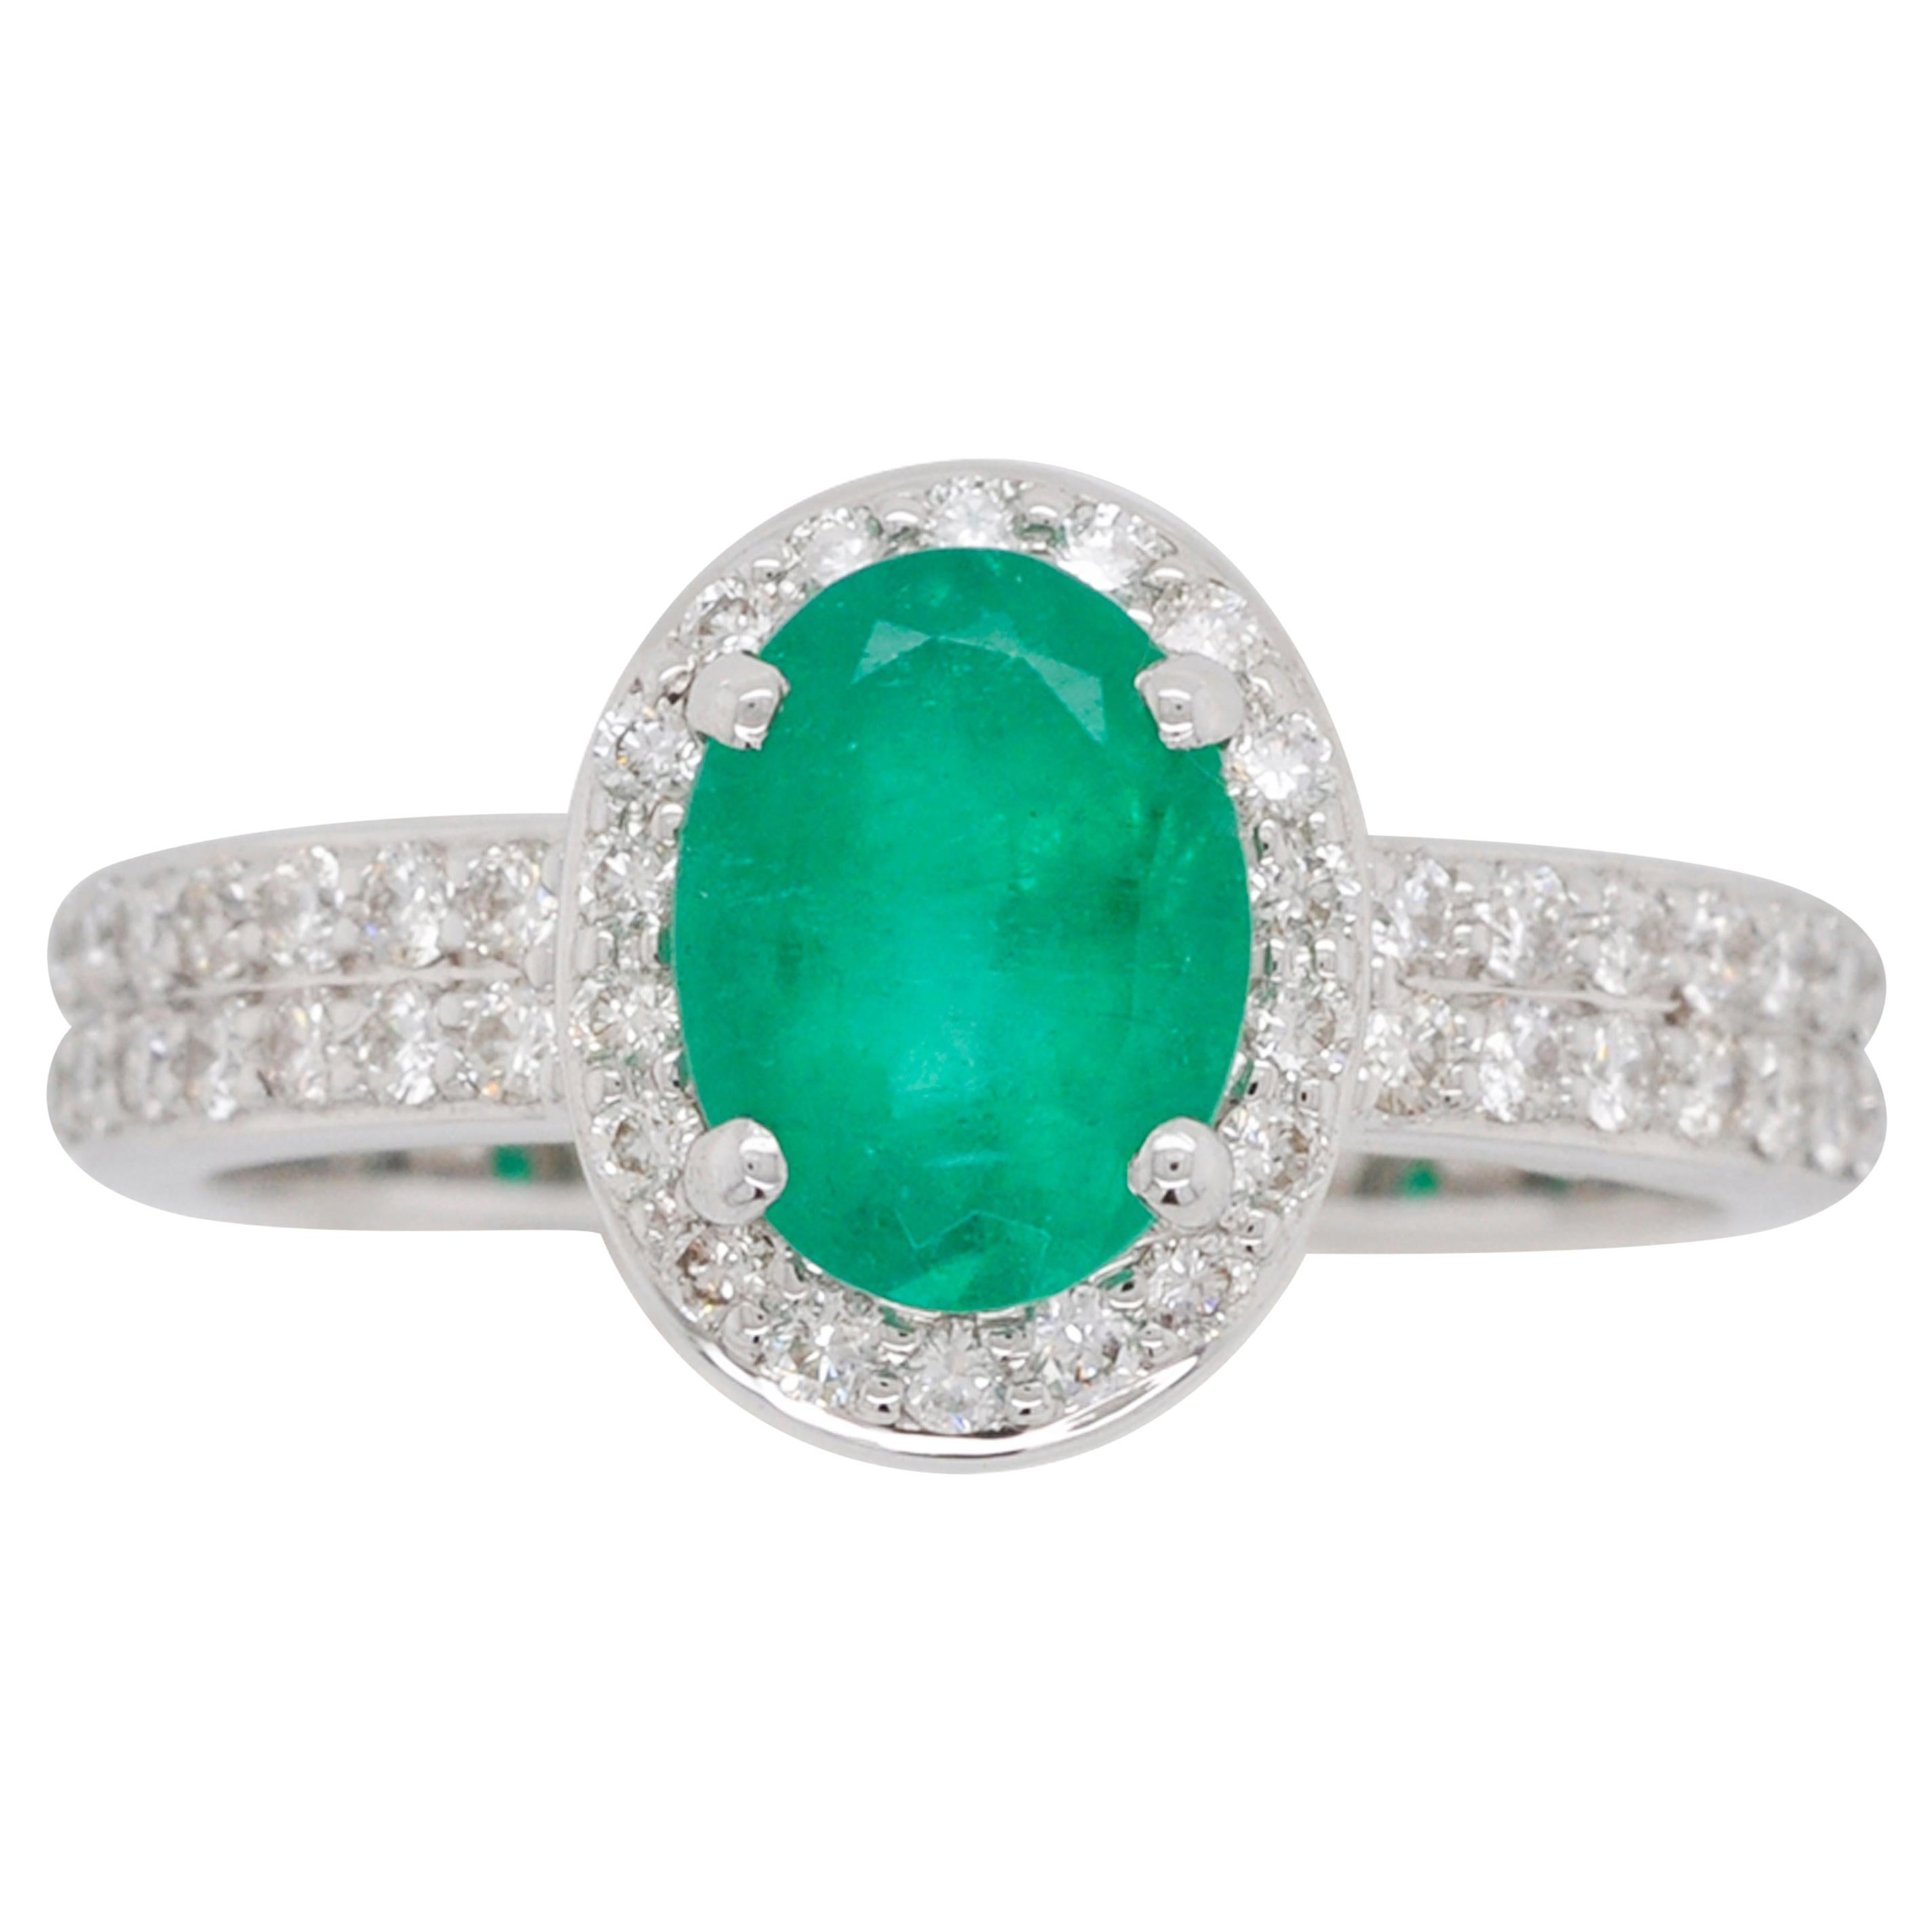 18 Karat White Gold 8.4x6.4 mm Oval Colombian Emerald Diamond Contemporary Ring For Sale